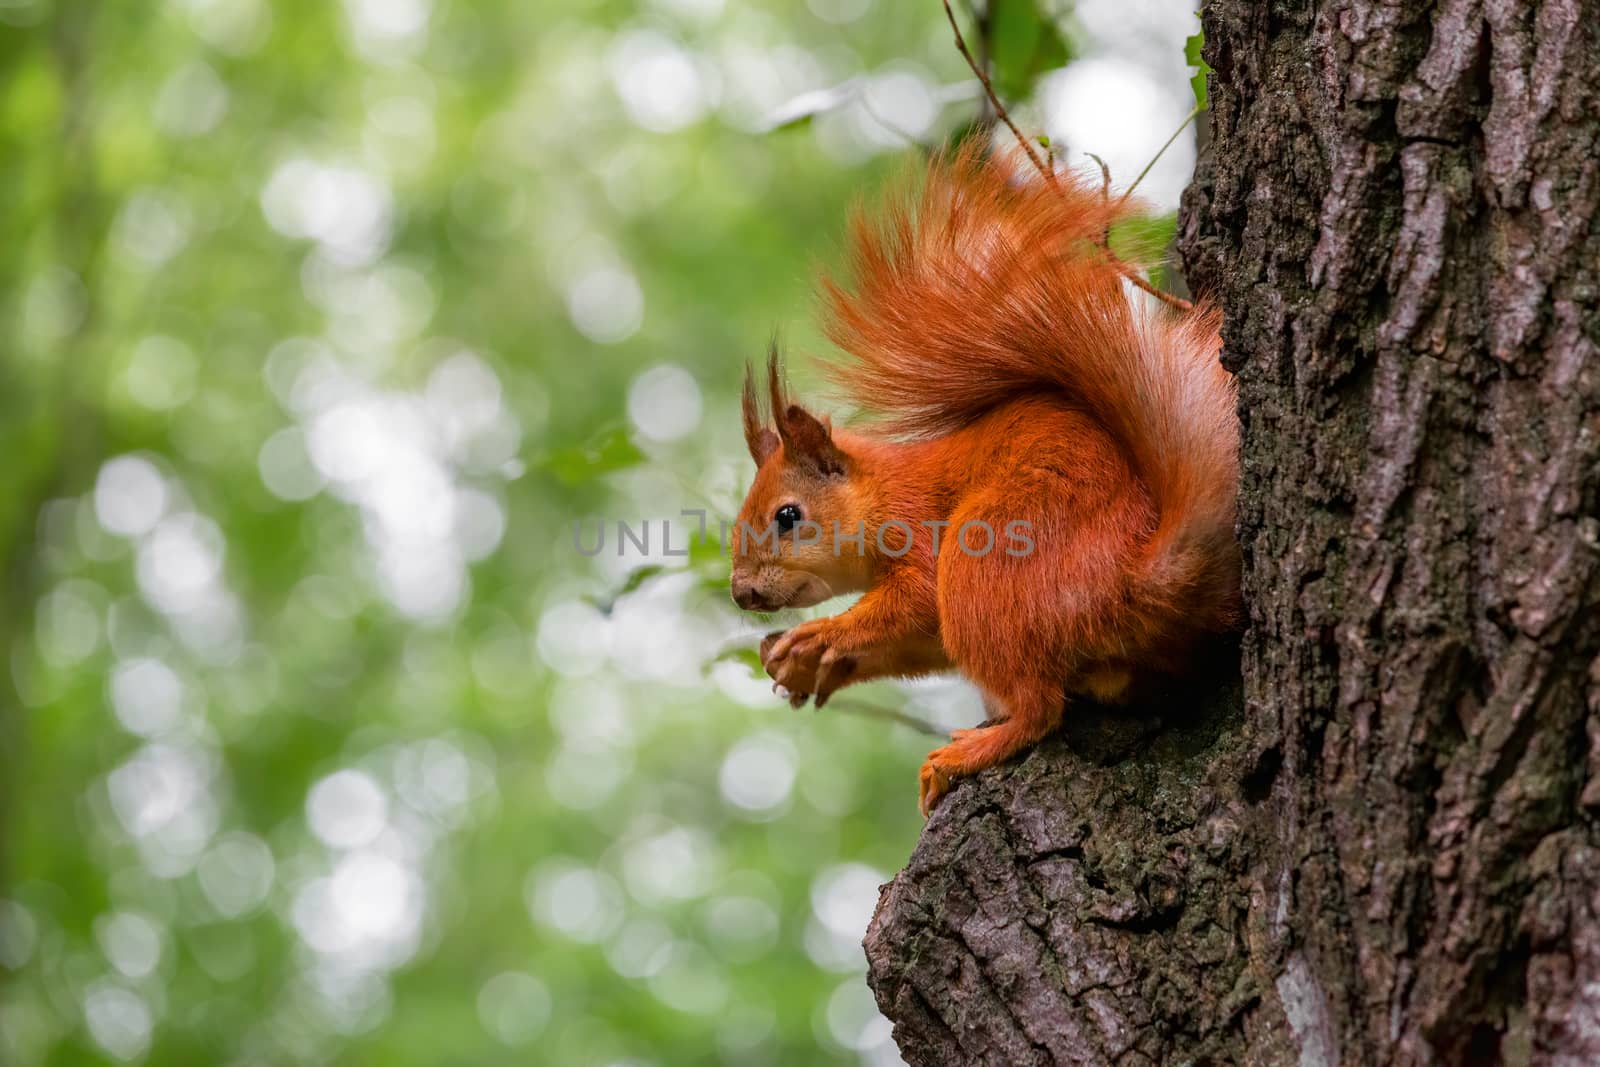 Cute red wild squirrel eating a walnut in the park. Close-up view